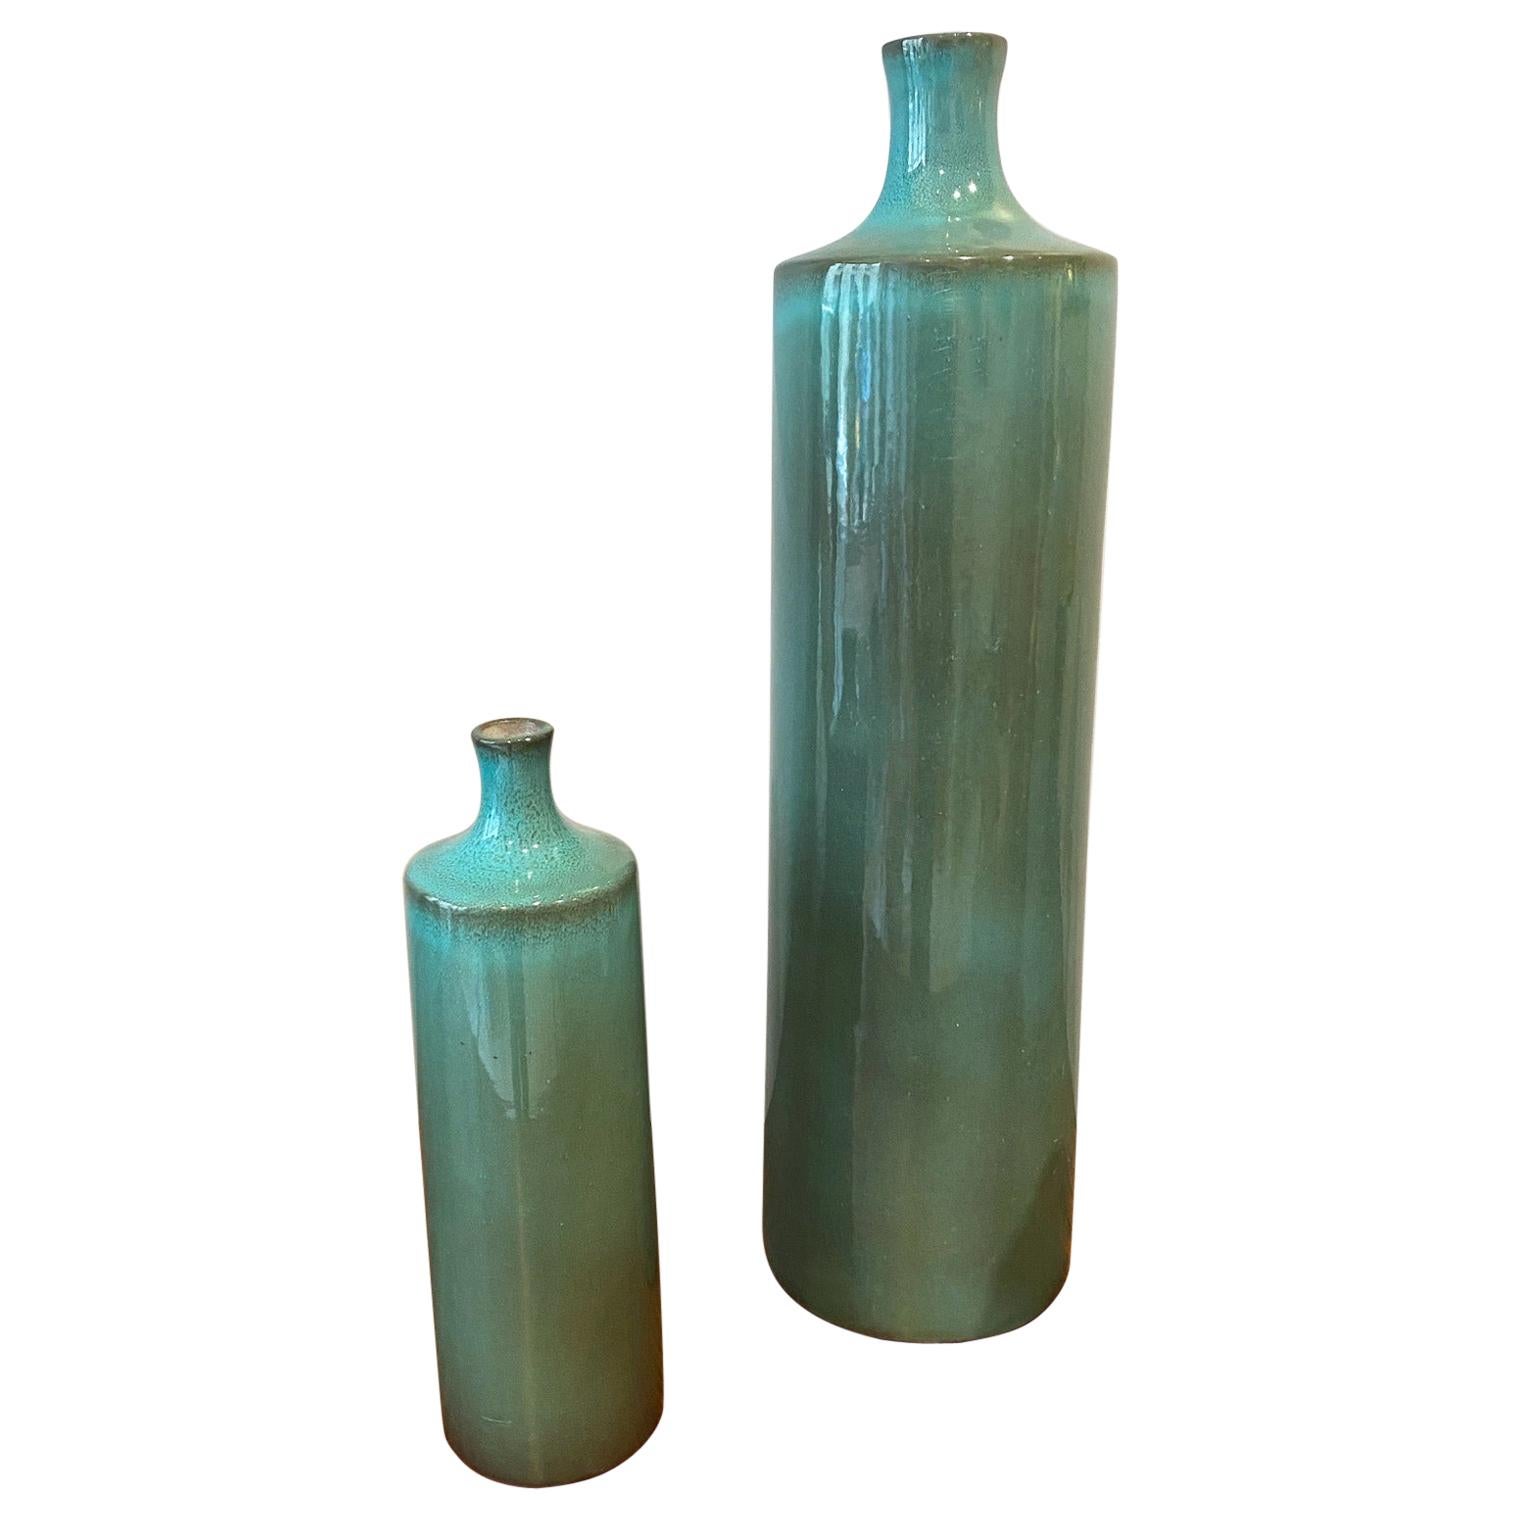 Set of Two Green Ceramic Vases Signed by Ruelland